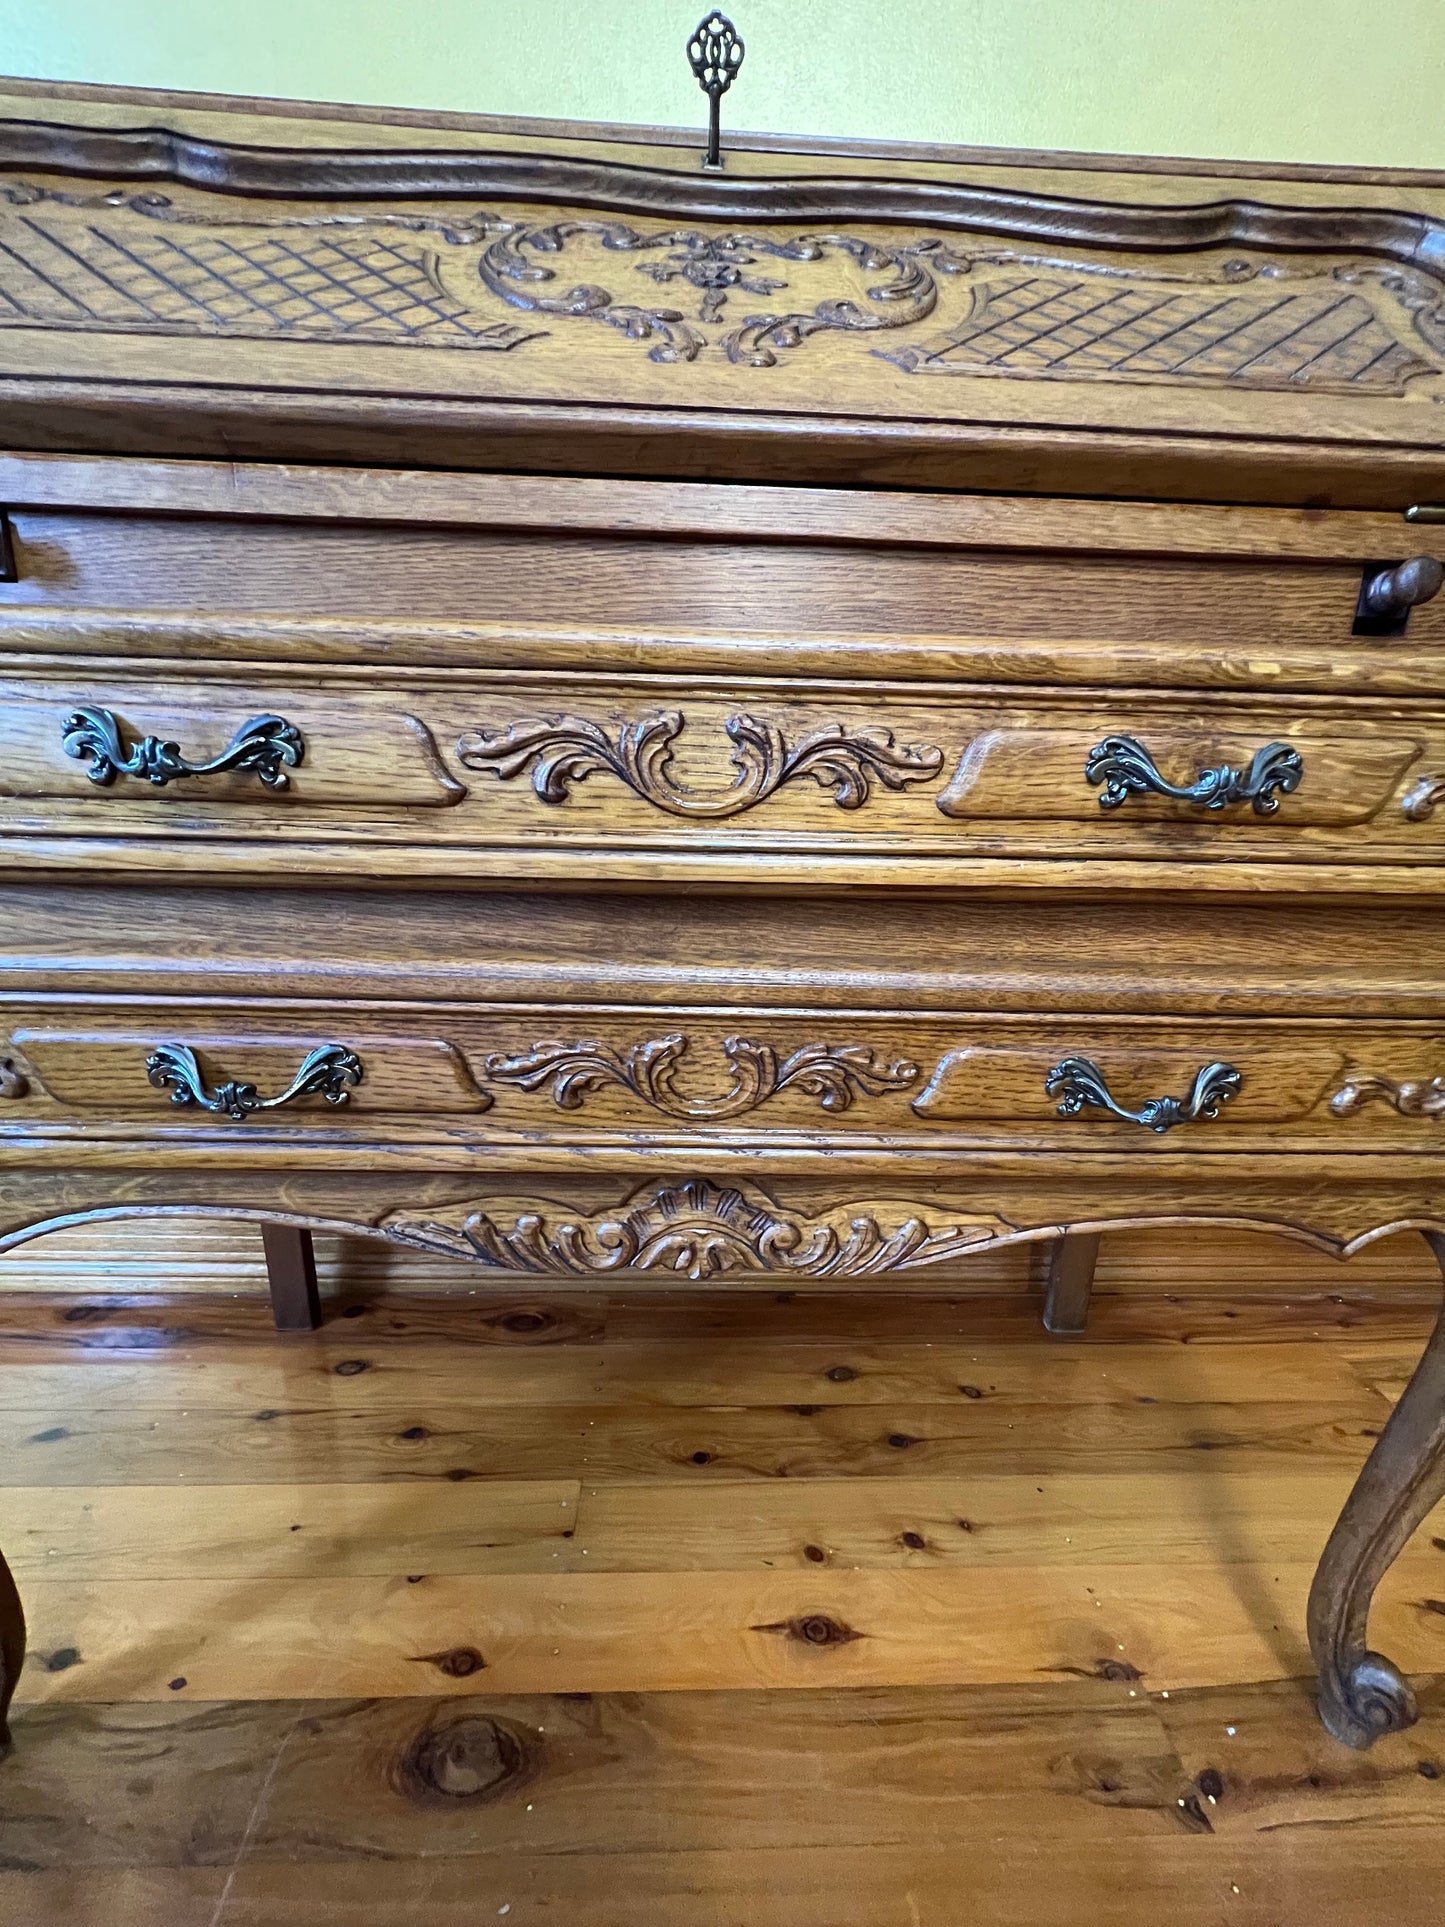 Antique French Bureau with Drawers (Refurbished)